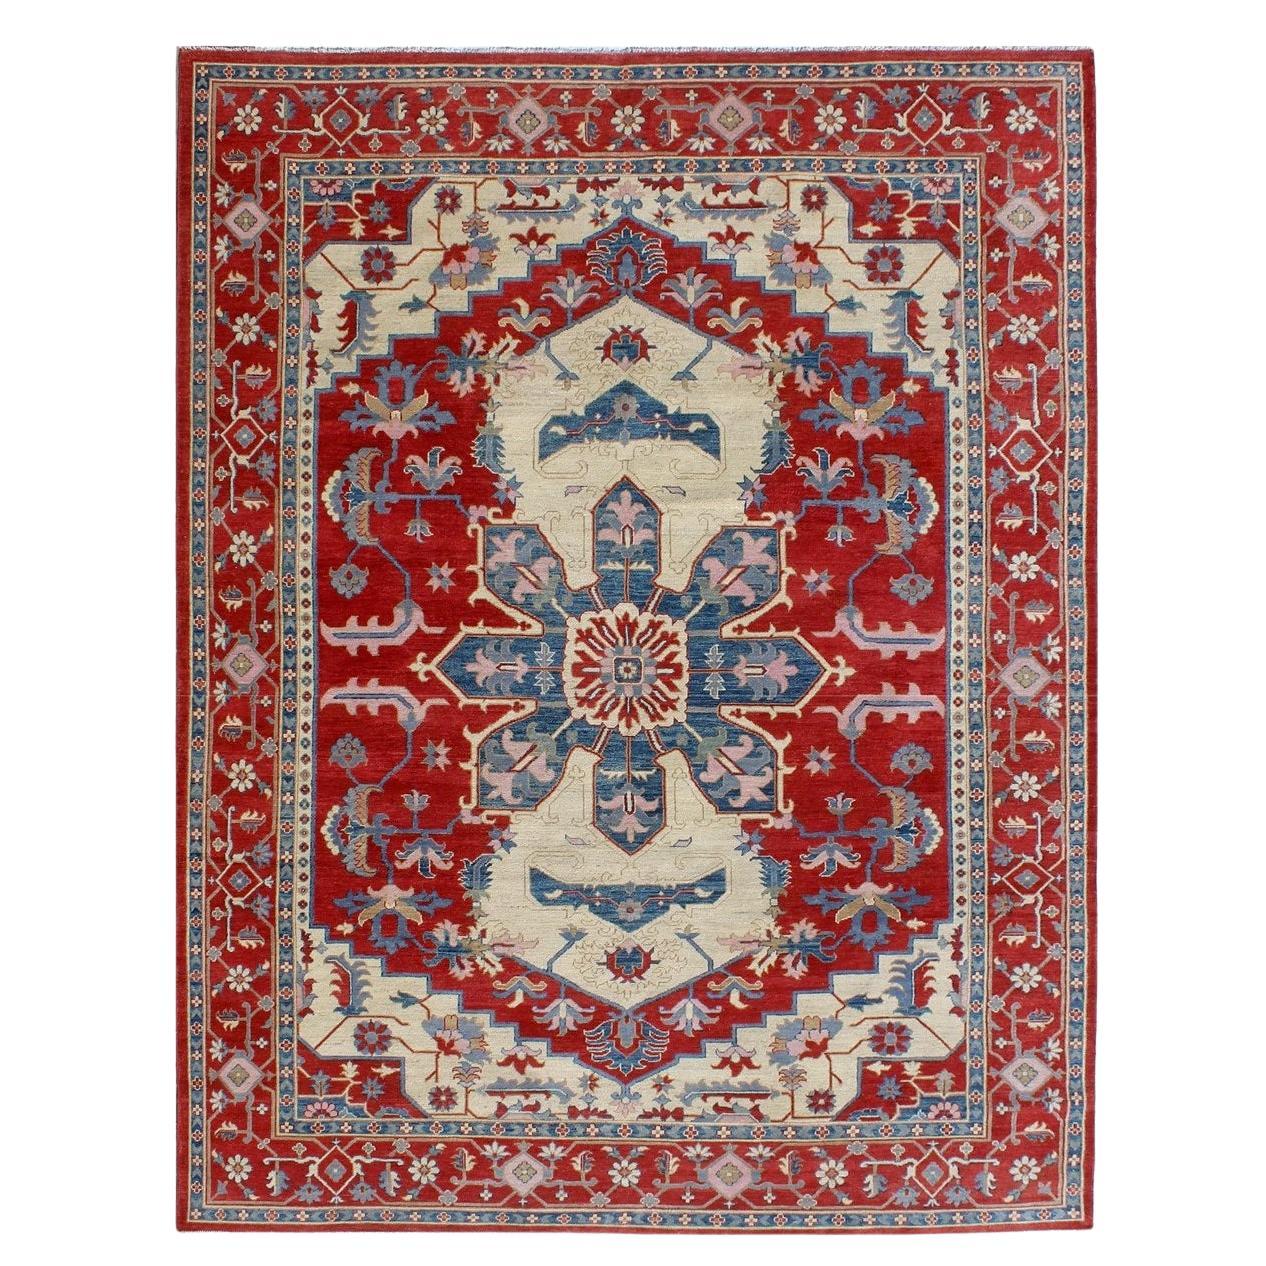 Hand-knotted carpet design inspired by ancient Serapis red and blue tones